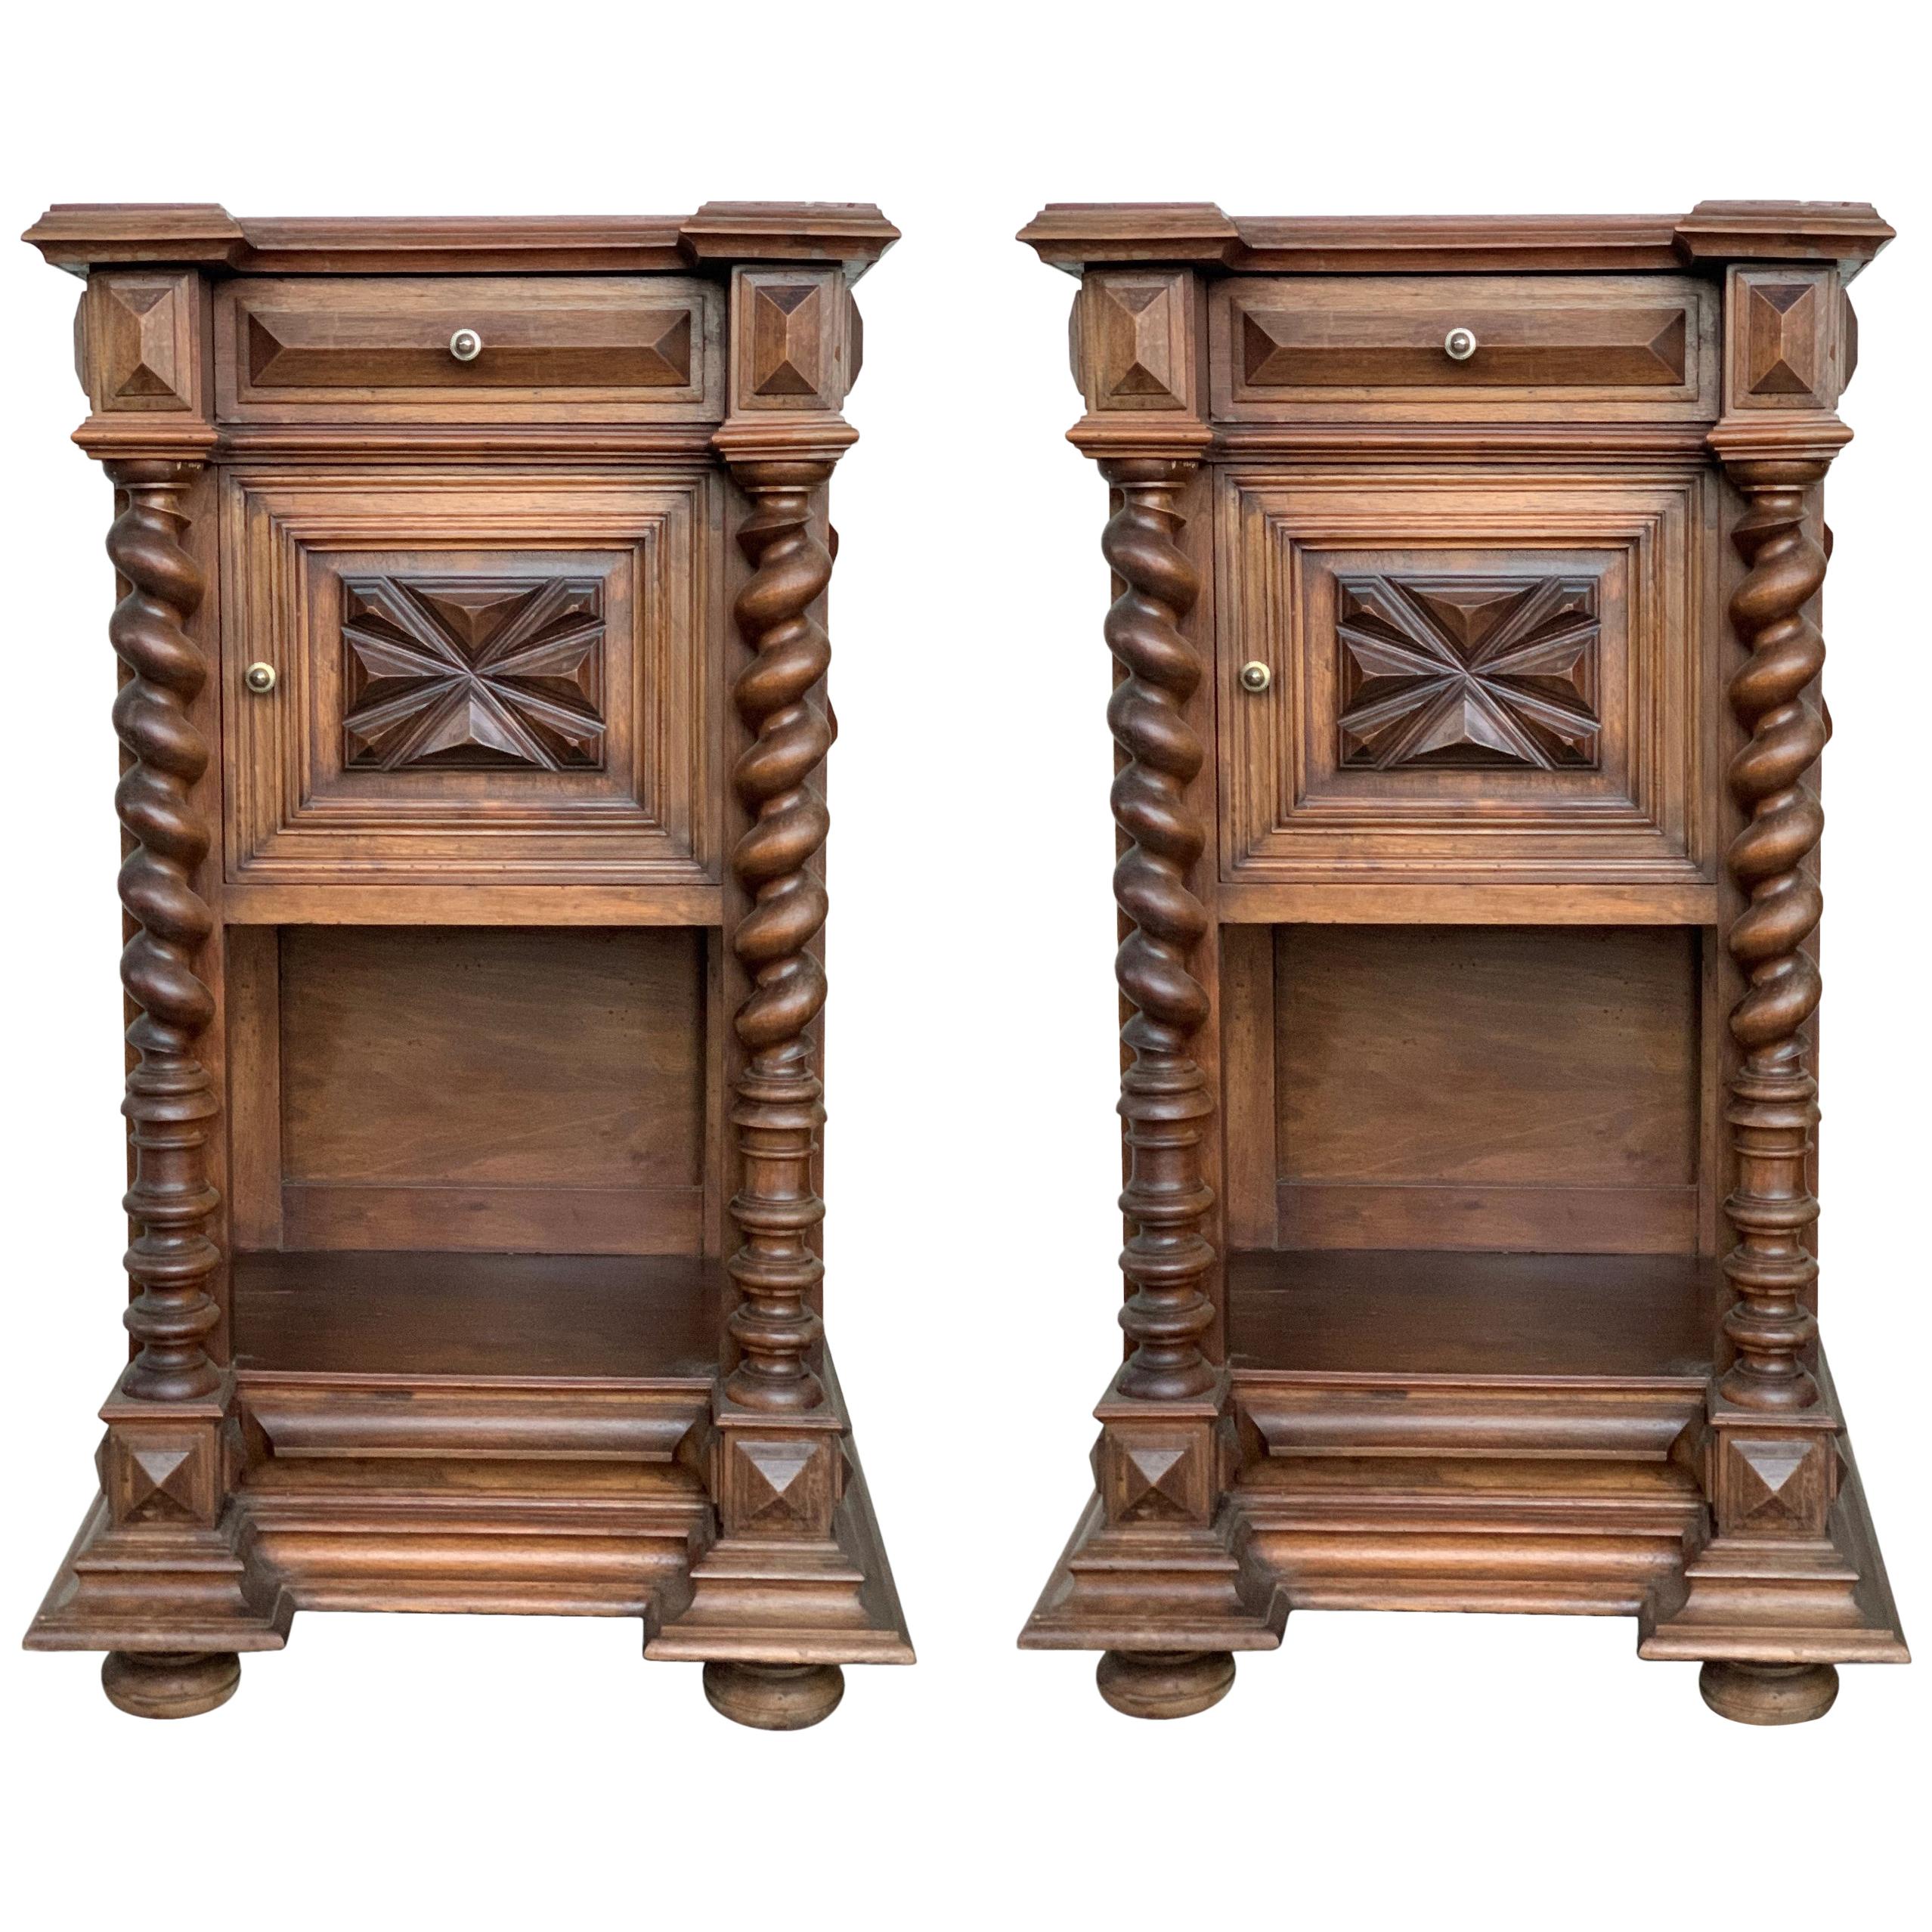 Pair of Solid Carved Brutalist French Nightstands with Solomonic Columns